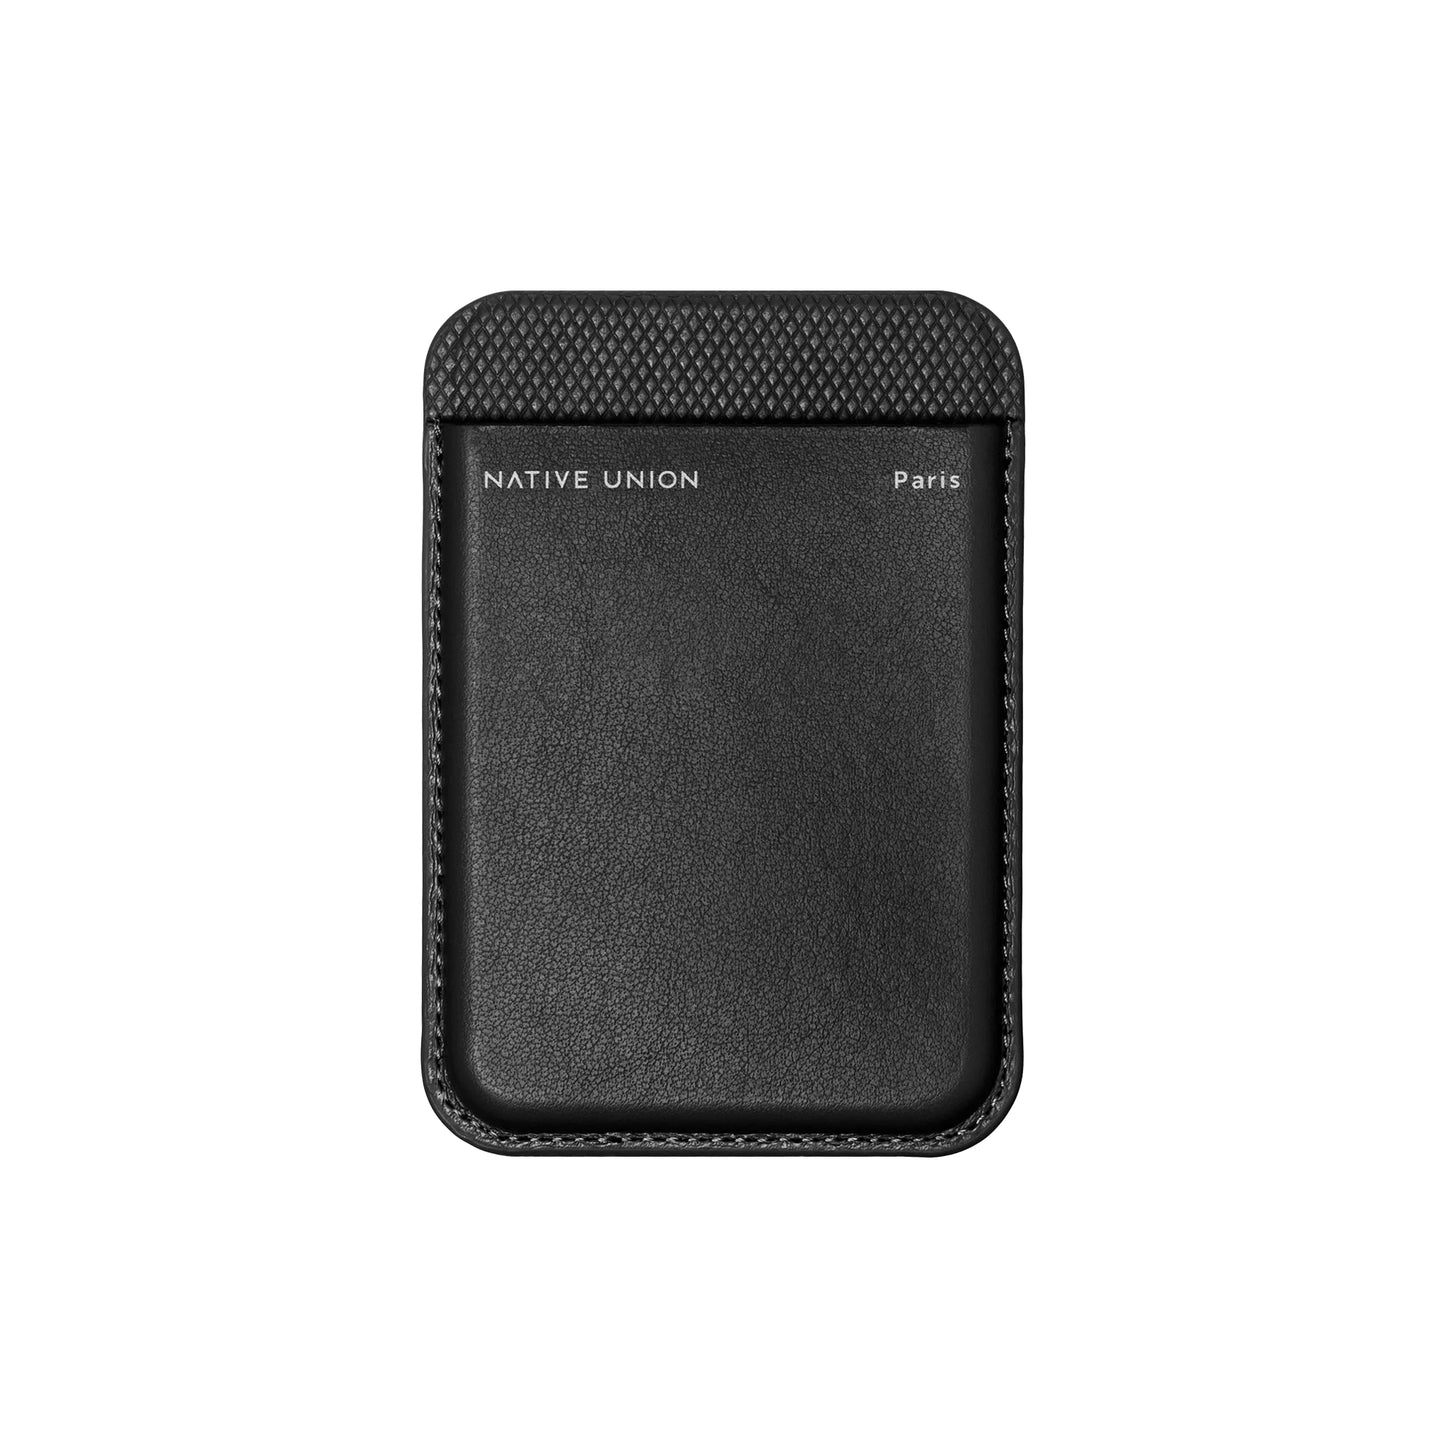 Native Union (Re)Classic Magnetic Wallet